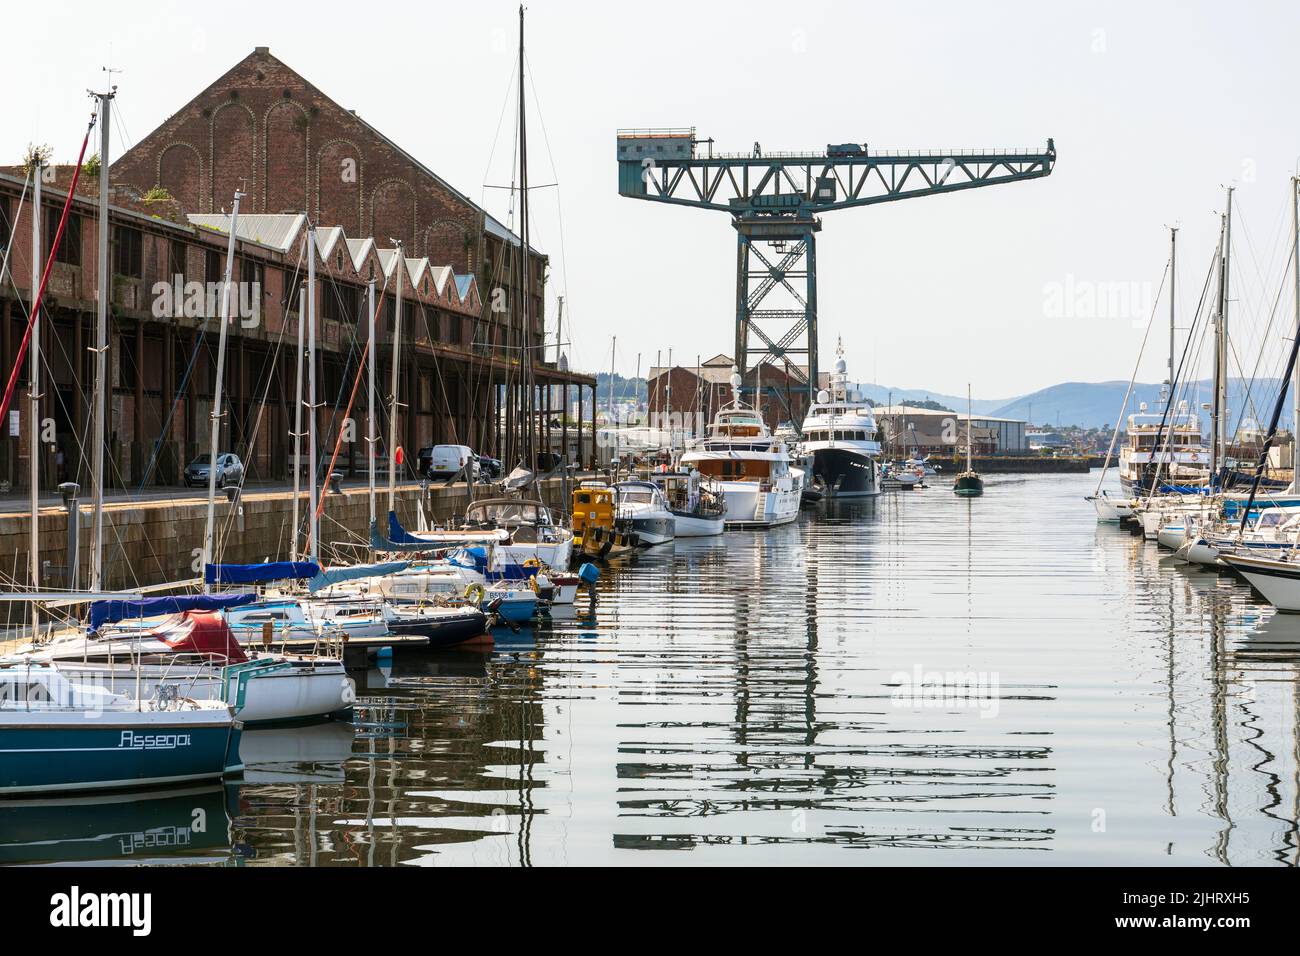 James Watt marina, with berthed yachts and the shipbuilding cantilever crane in the distance, Port Glasgow, Inverclyde, Scotland, UK Stock Photo